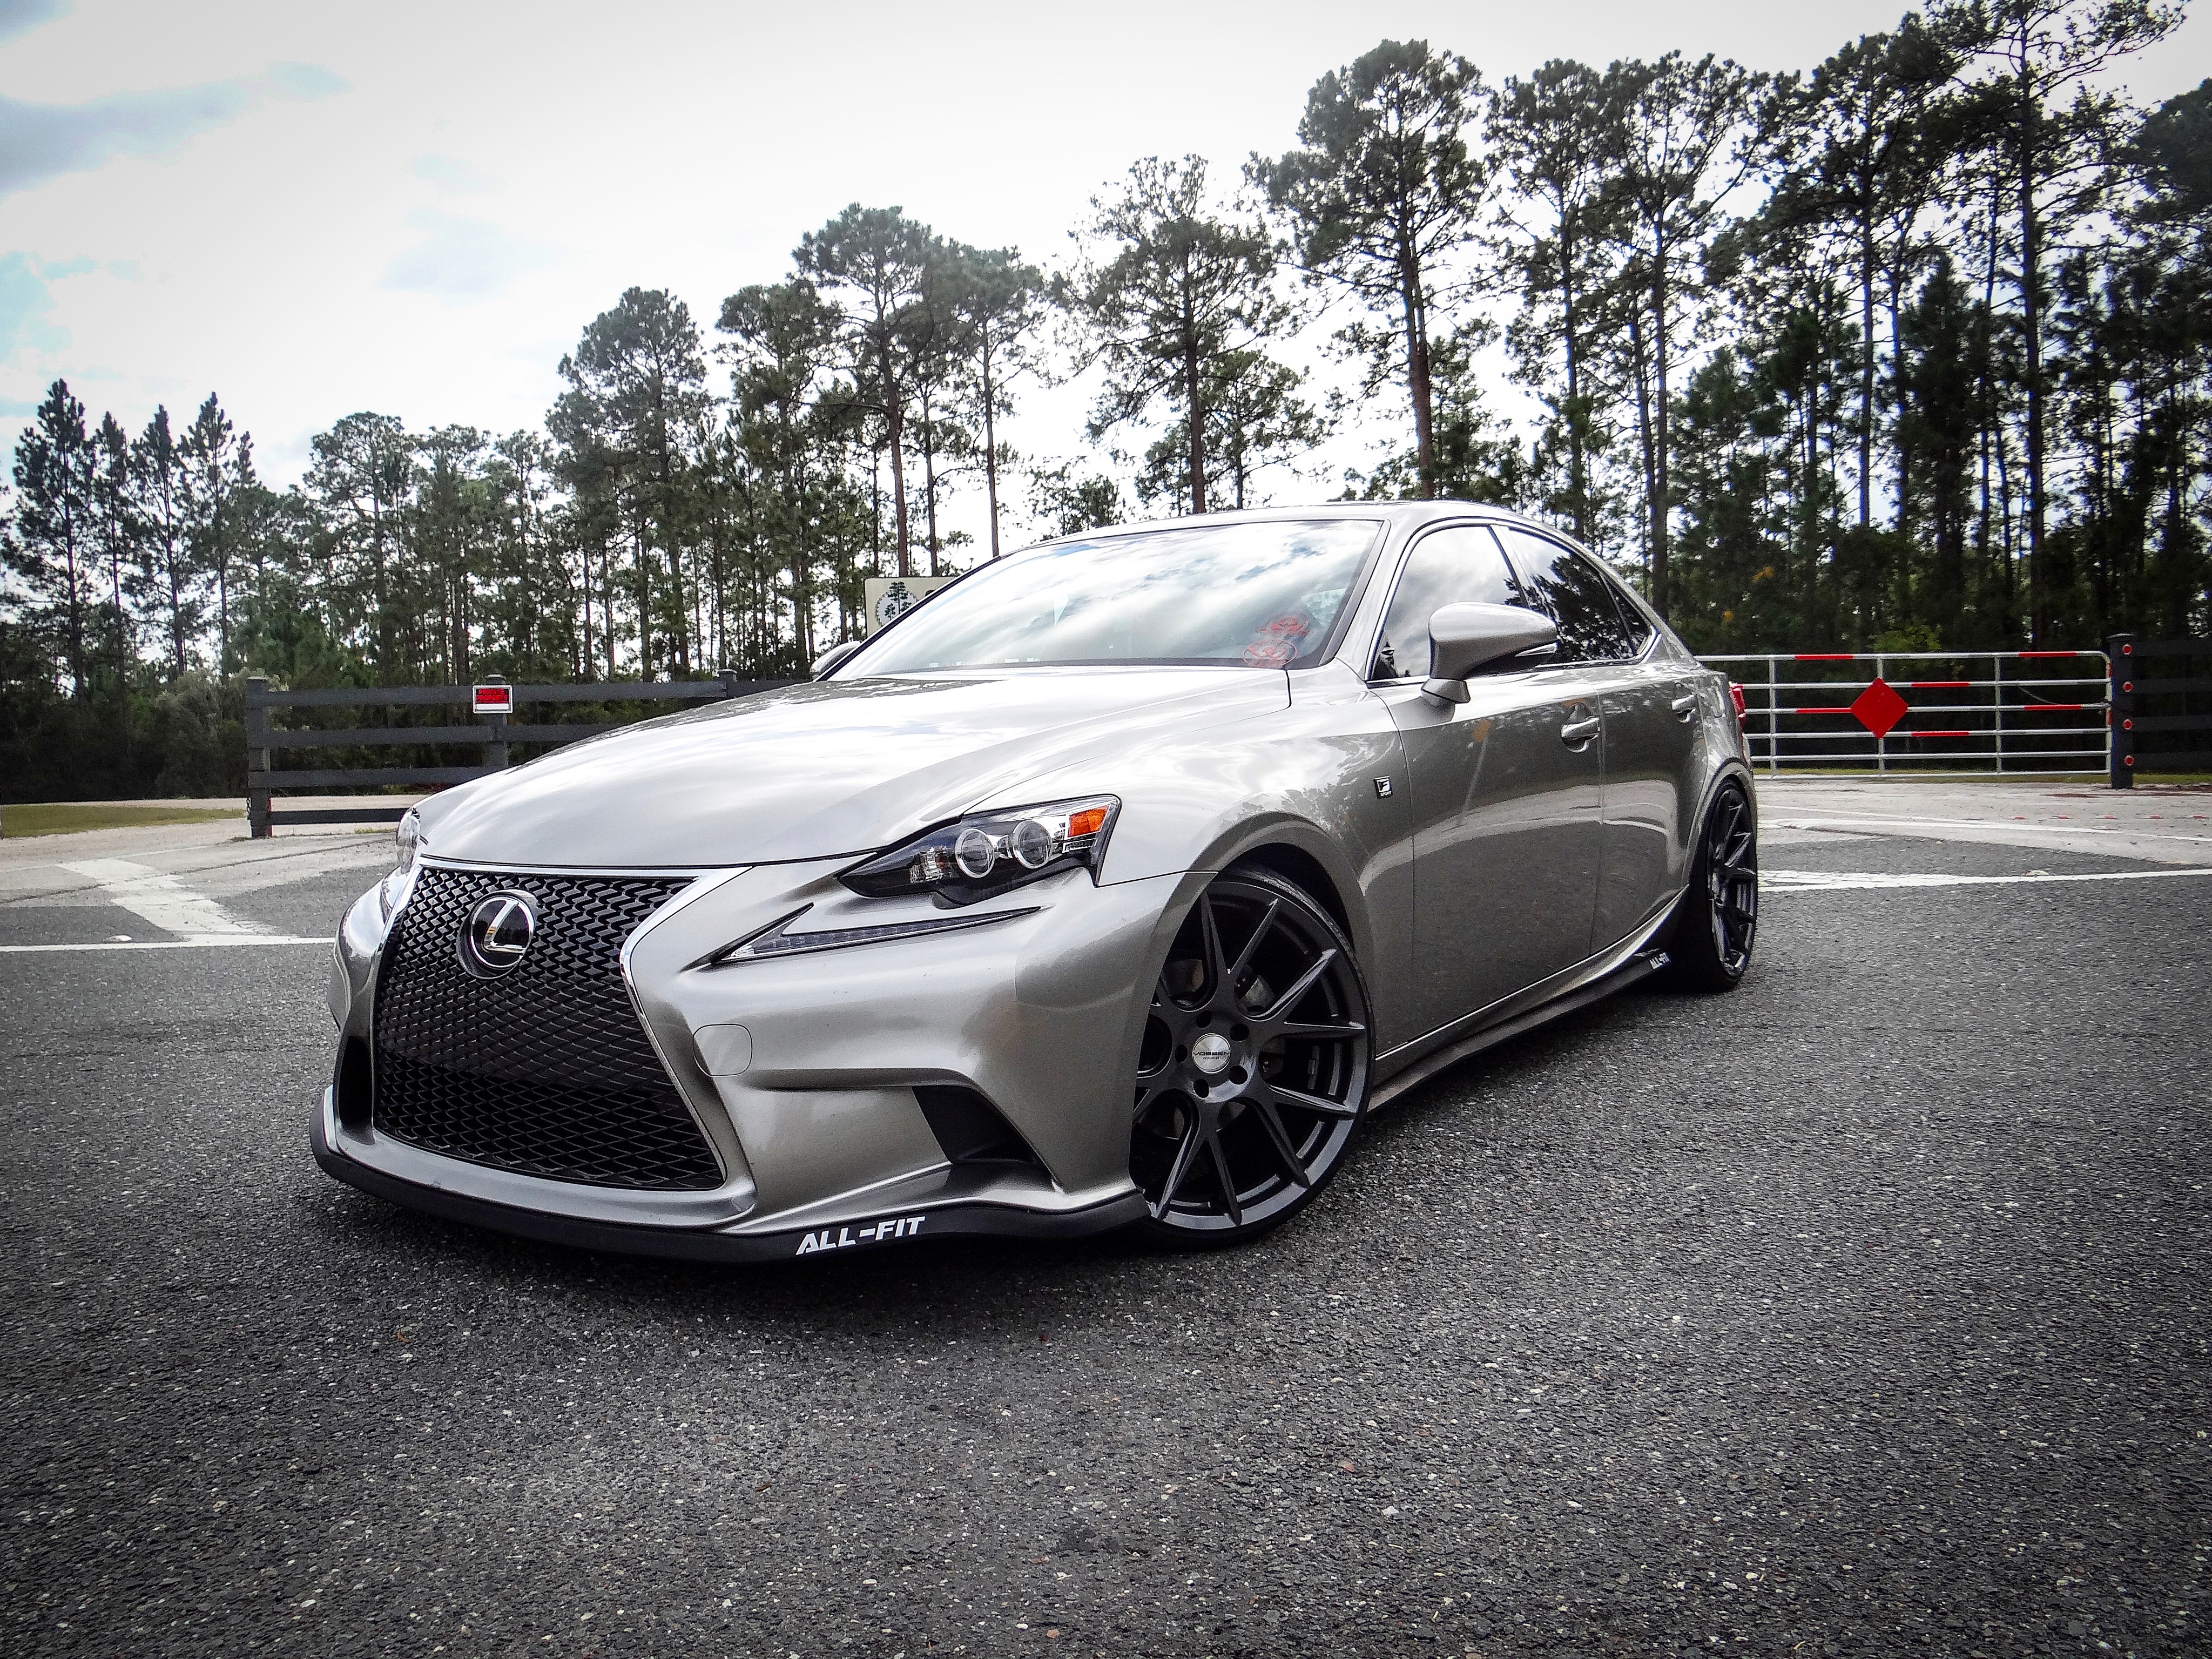 2015 IS250 F-Sport - Atomic Silver/Rioja Red Build Thread - Page 3